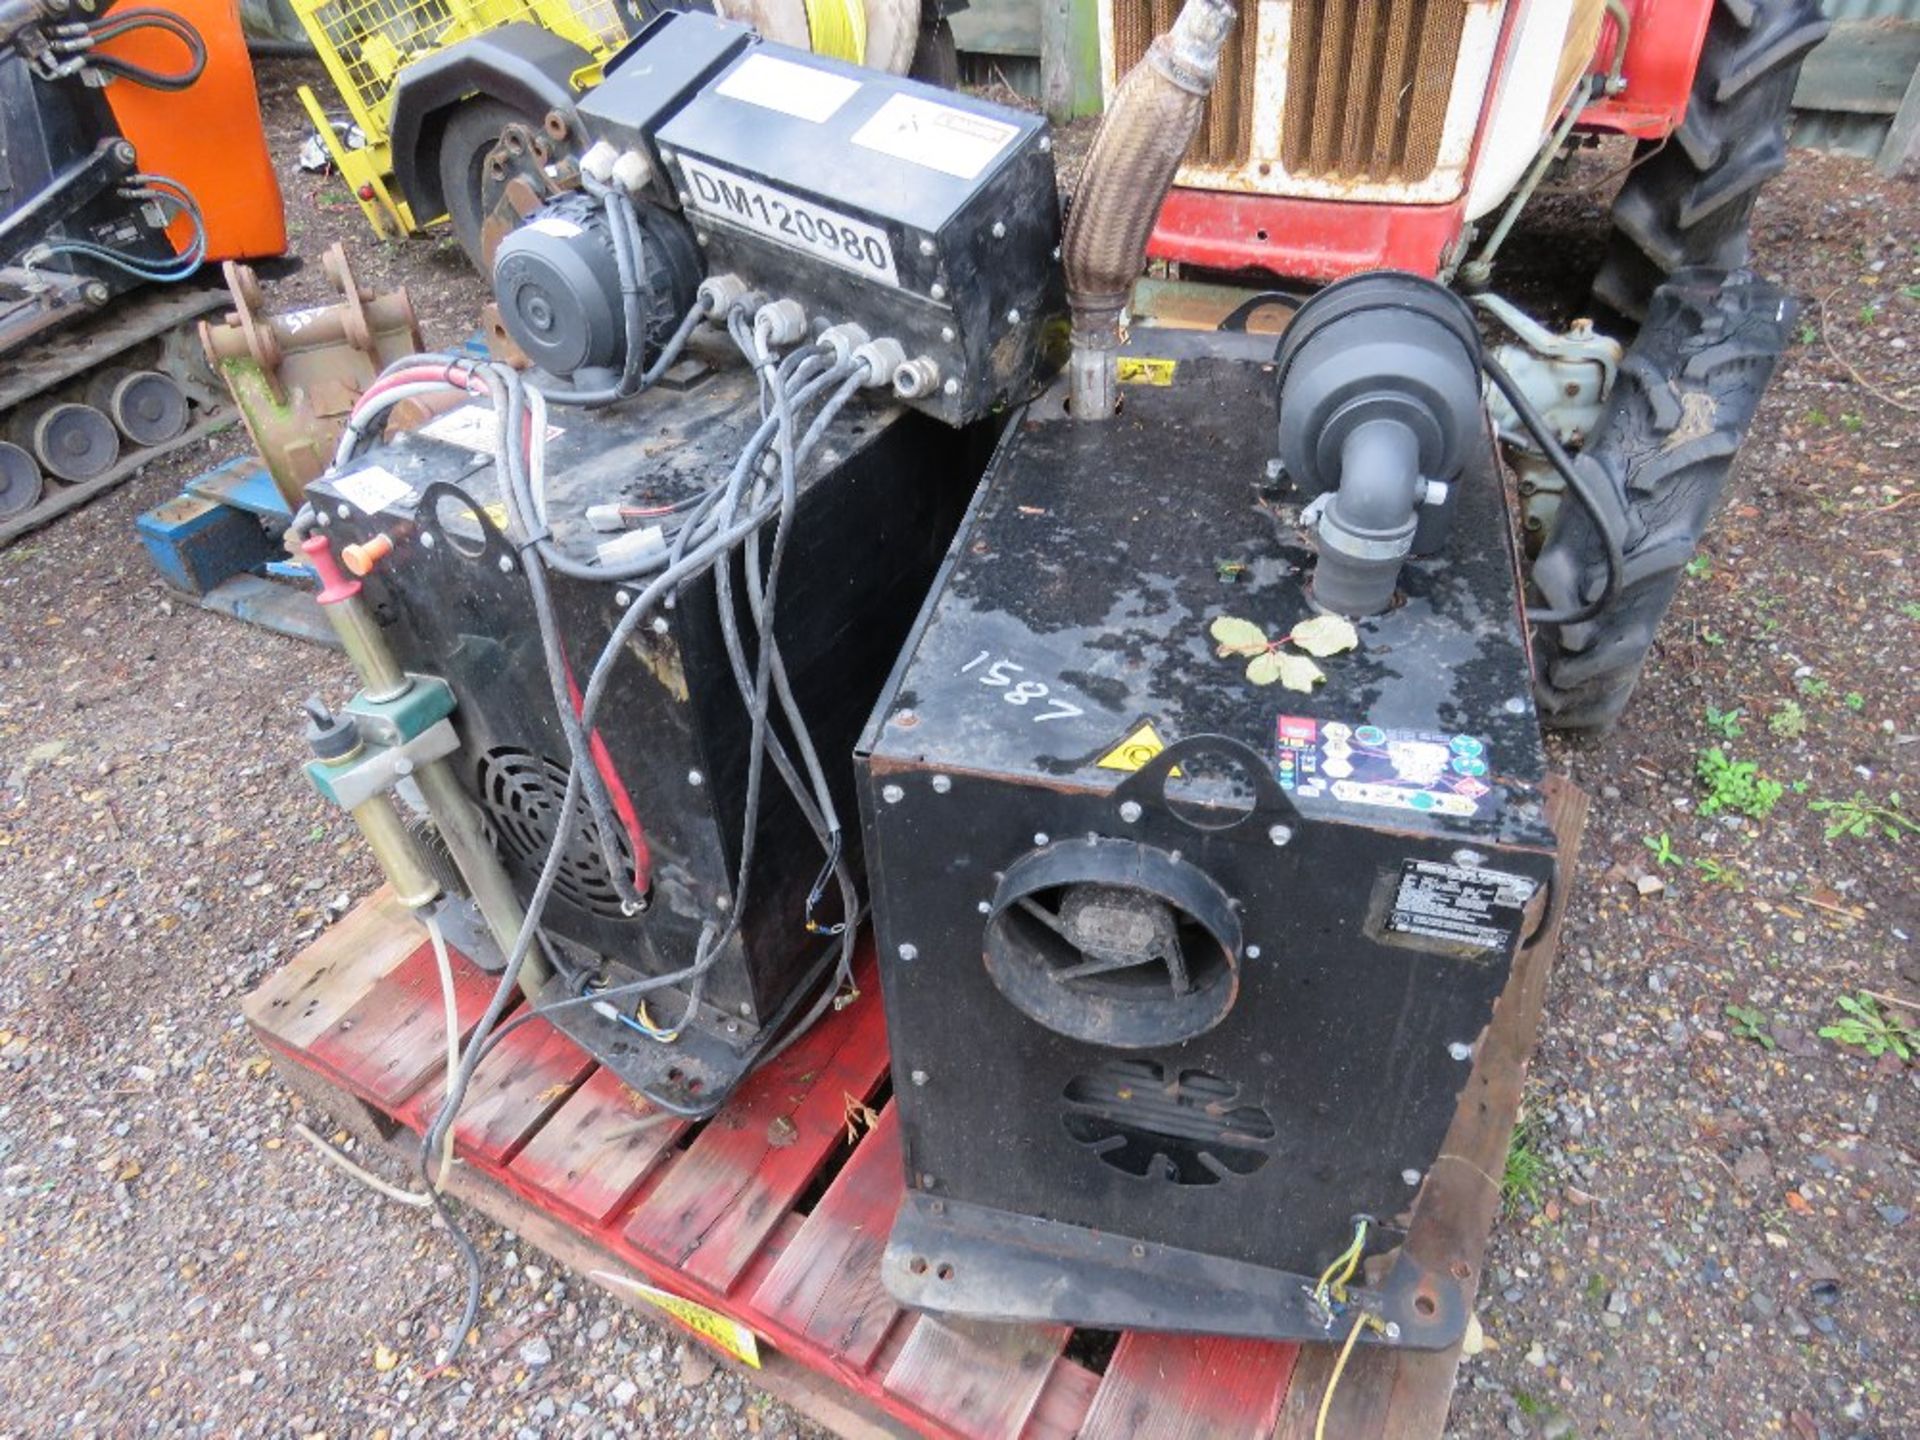 2 X HATZ DIESEL ENGINED GENERATOR SETS, 3.1KW OUTPUT. EX LIGHTING TOWERS. - Image 2 of 7